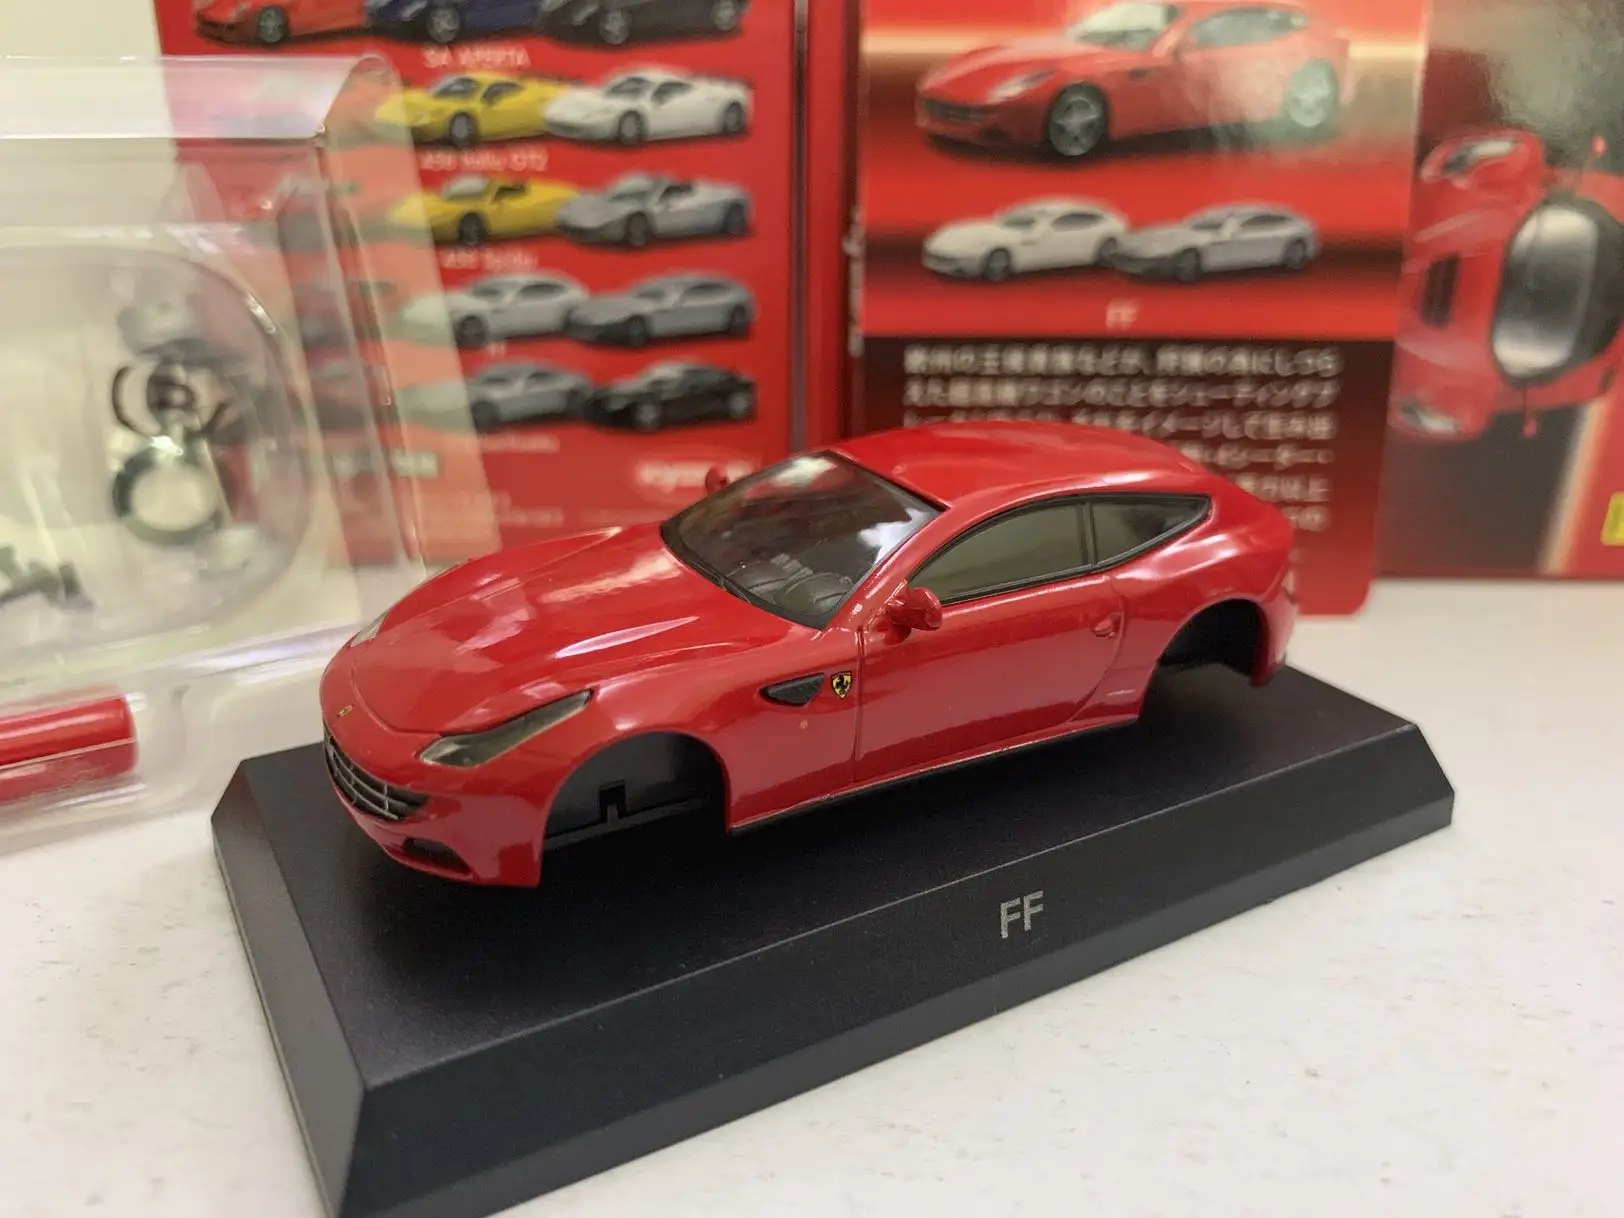 

1/64 KYOSHO Ferrari FF LM F1 RACING Collection of die-cast alloy assembled car decoration model toys